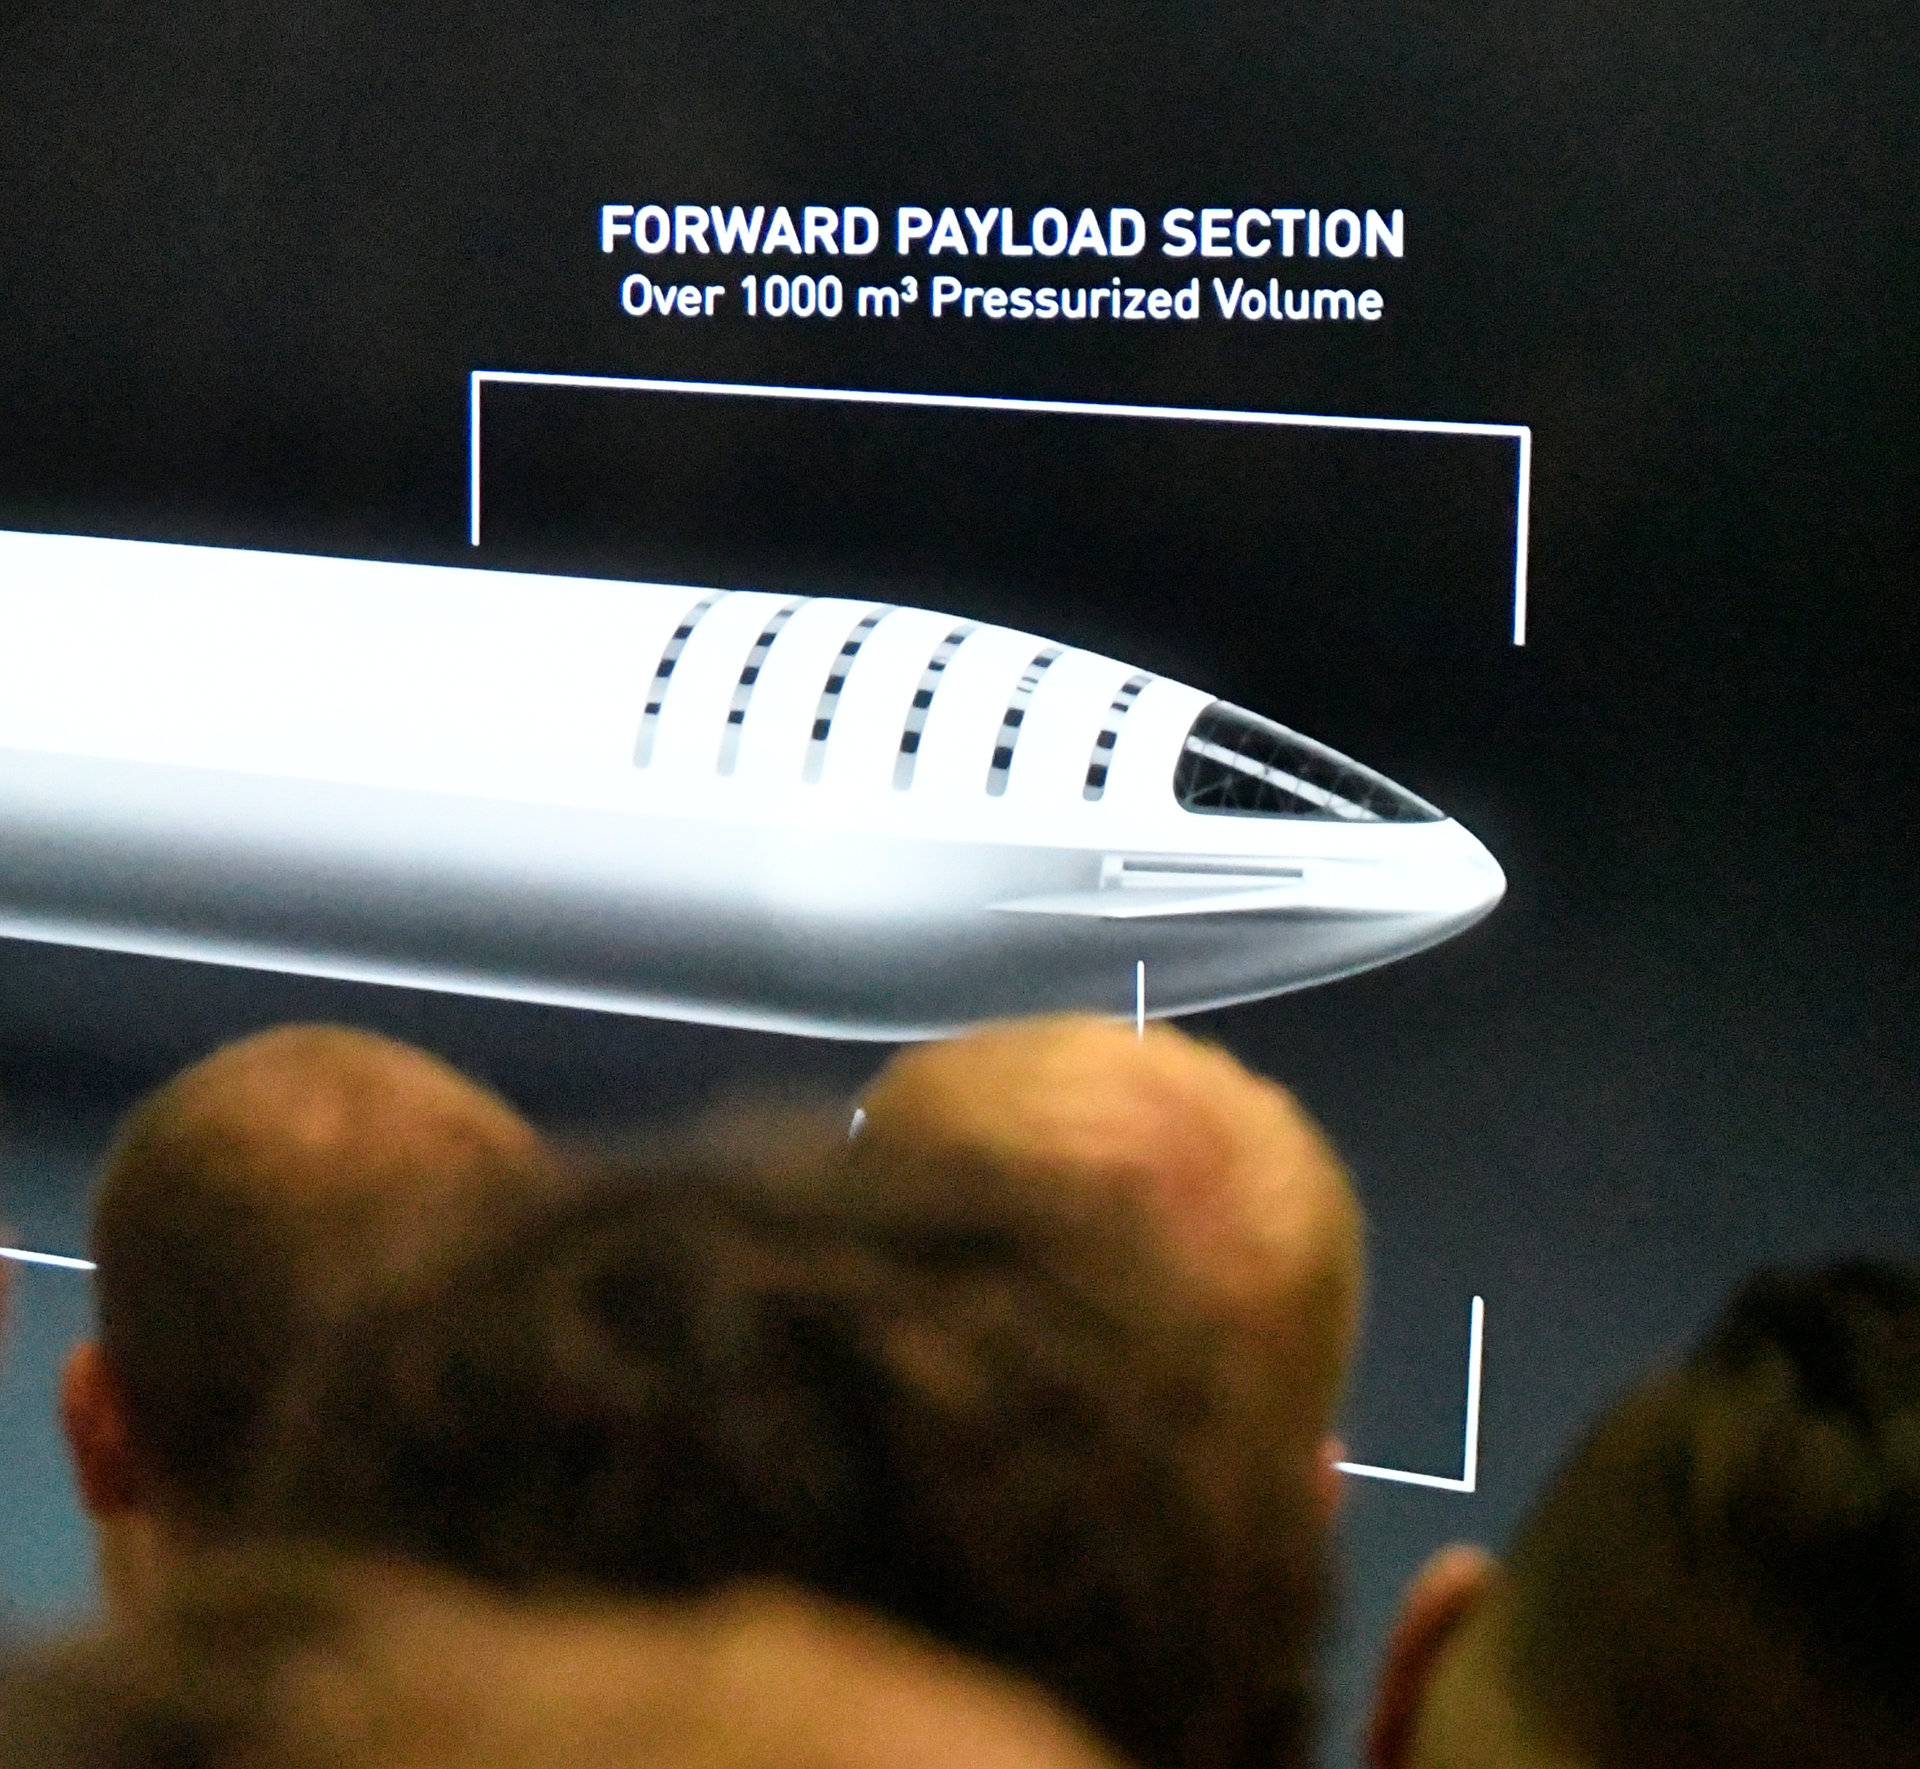 SpaceX CEO Elon Musk shows how the new BFR works during a press conference of the worldâs first private passenger scheduled to fly around the Moon aboard SpaceXâs BFR launch vehicle, at the company's headquarters in Hawthorne